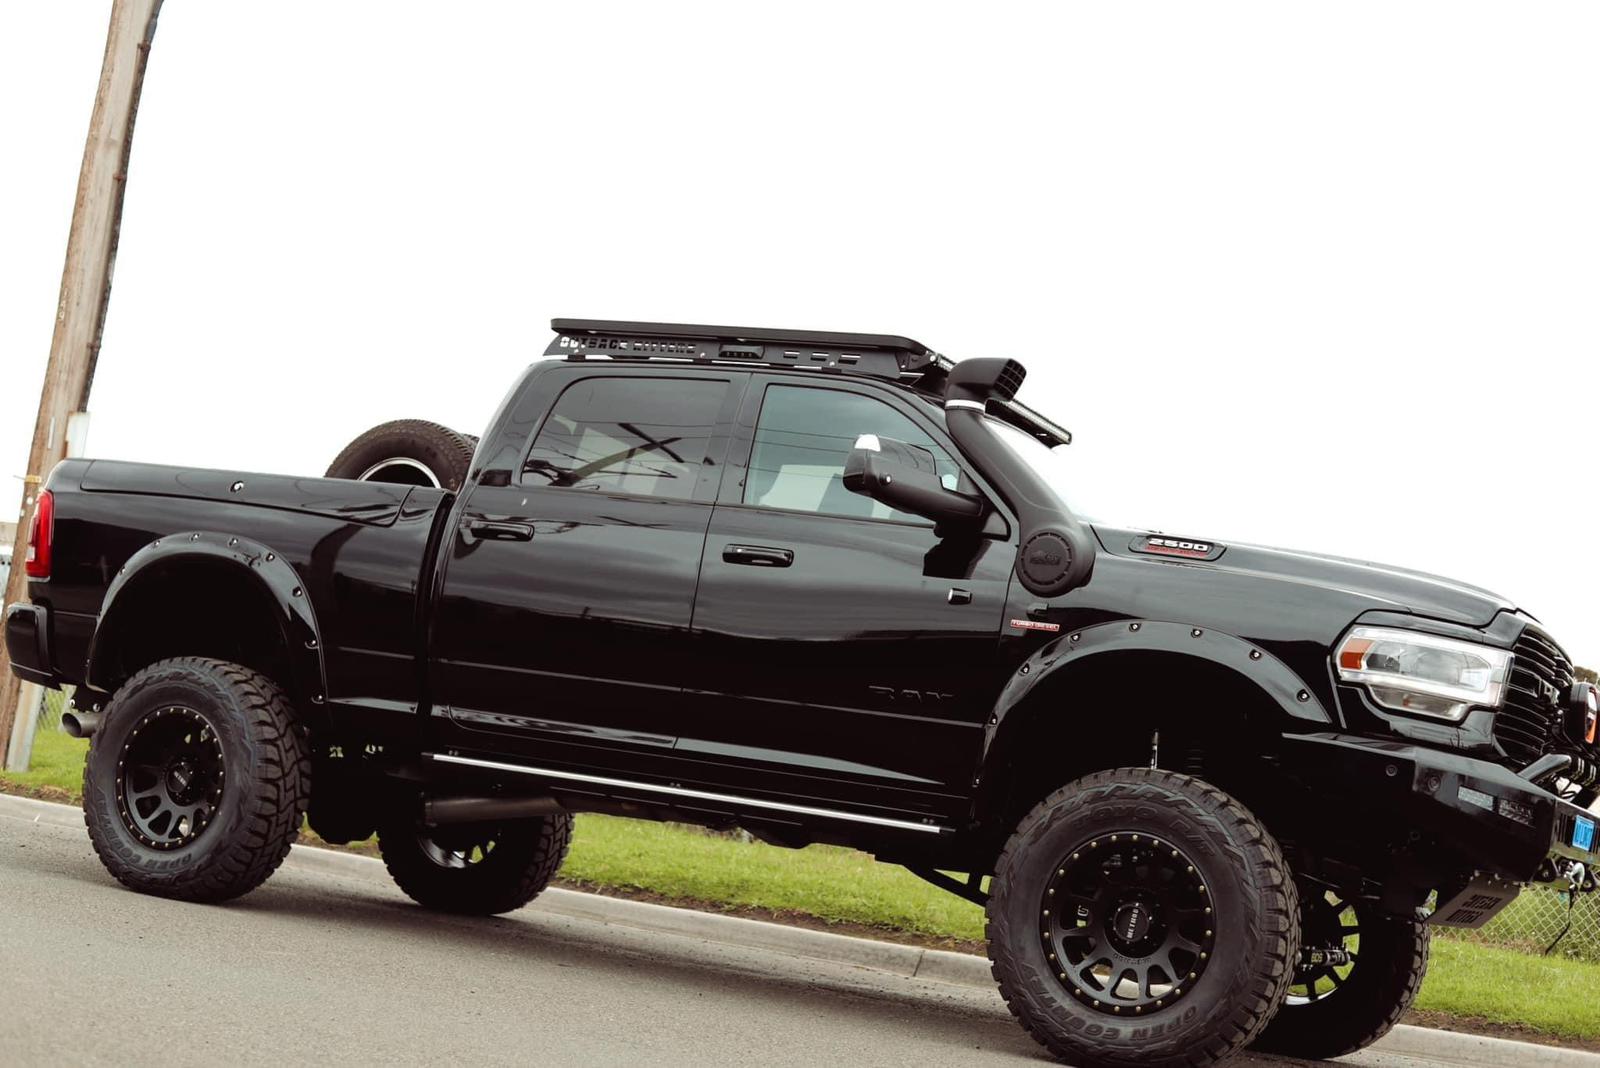 BDS Suspension 6" Lift Kit for 2019+ Ram 2500 with Fox 2.0 Shocks - Outback Kitters